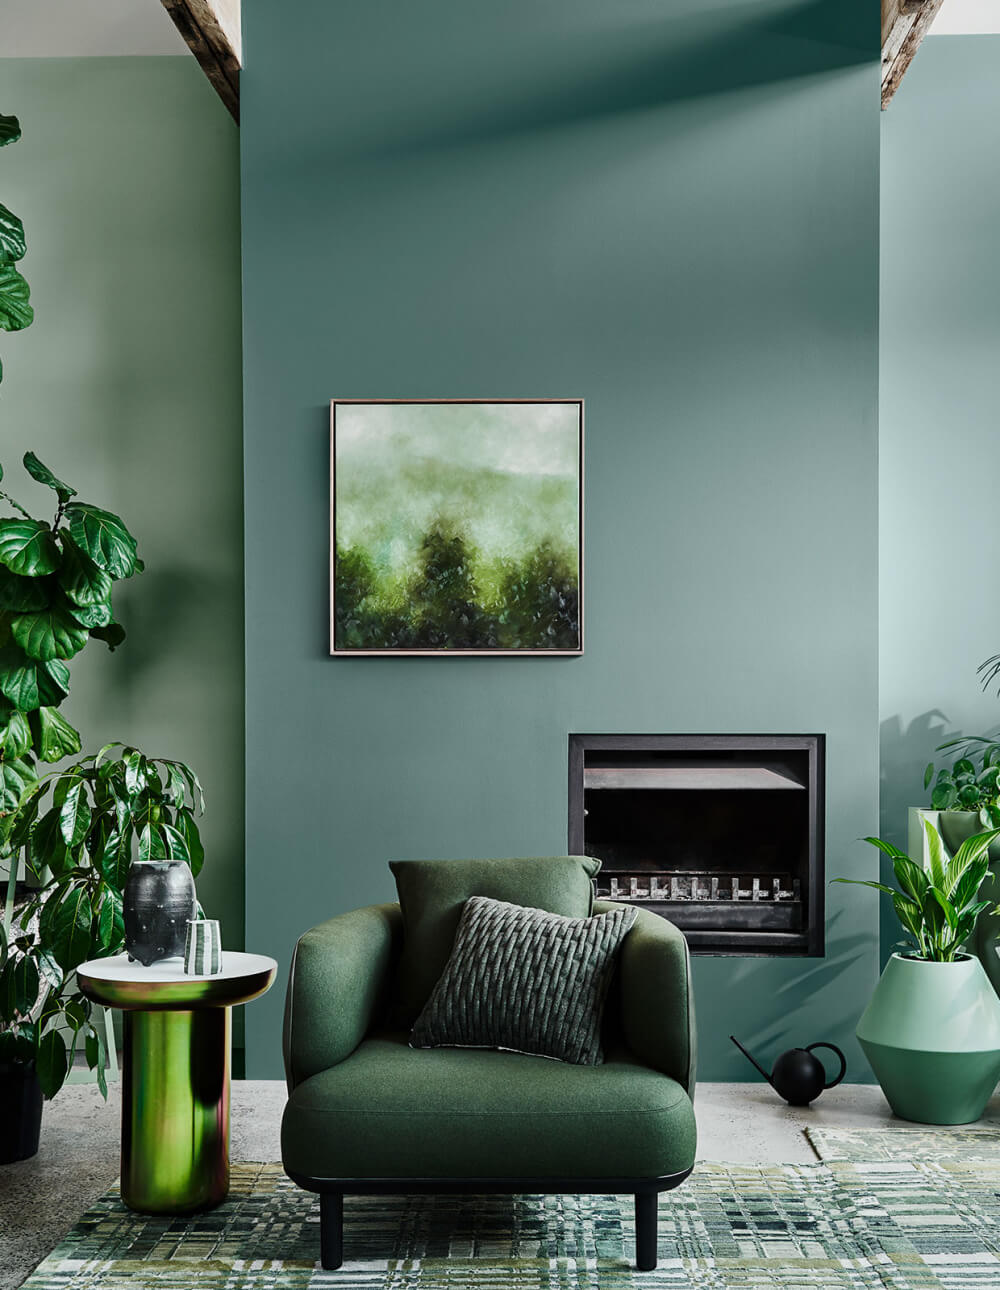 TheNordroom DuluxColorForecast2020 7 The Color Trends For 2020 Are Inspired by Nature